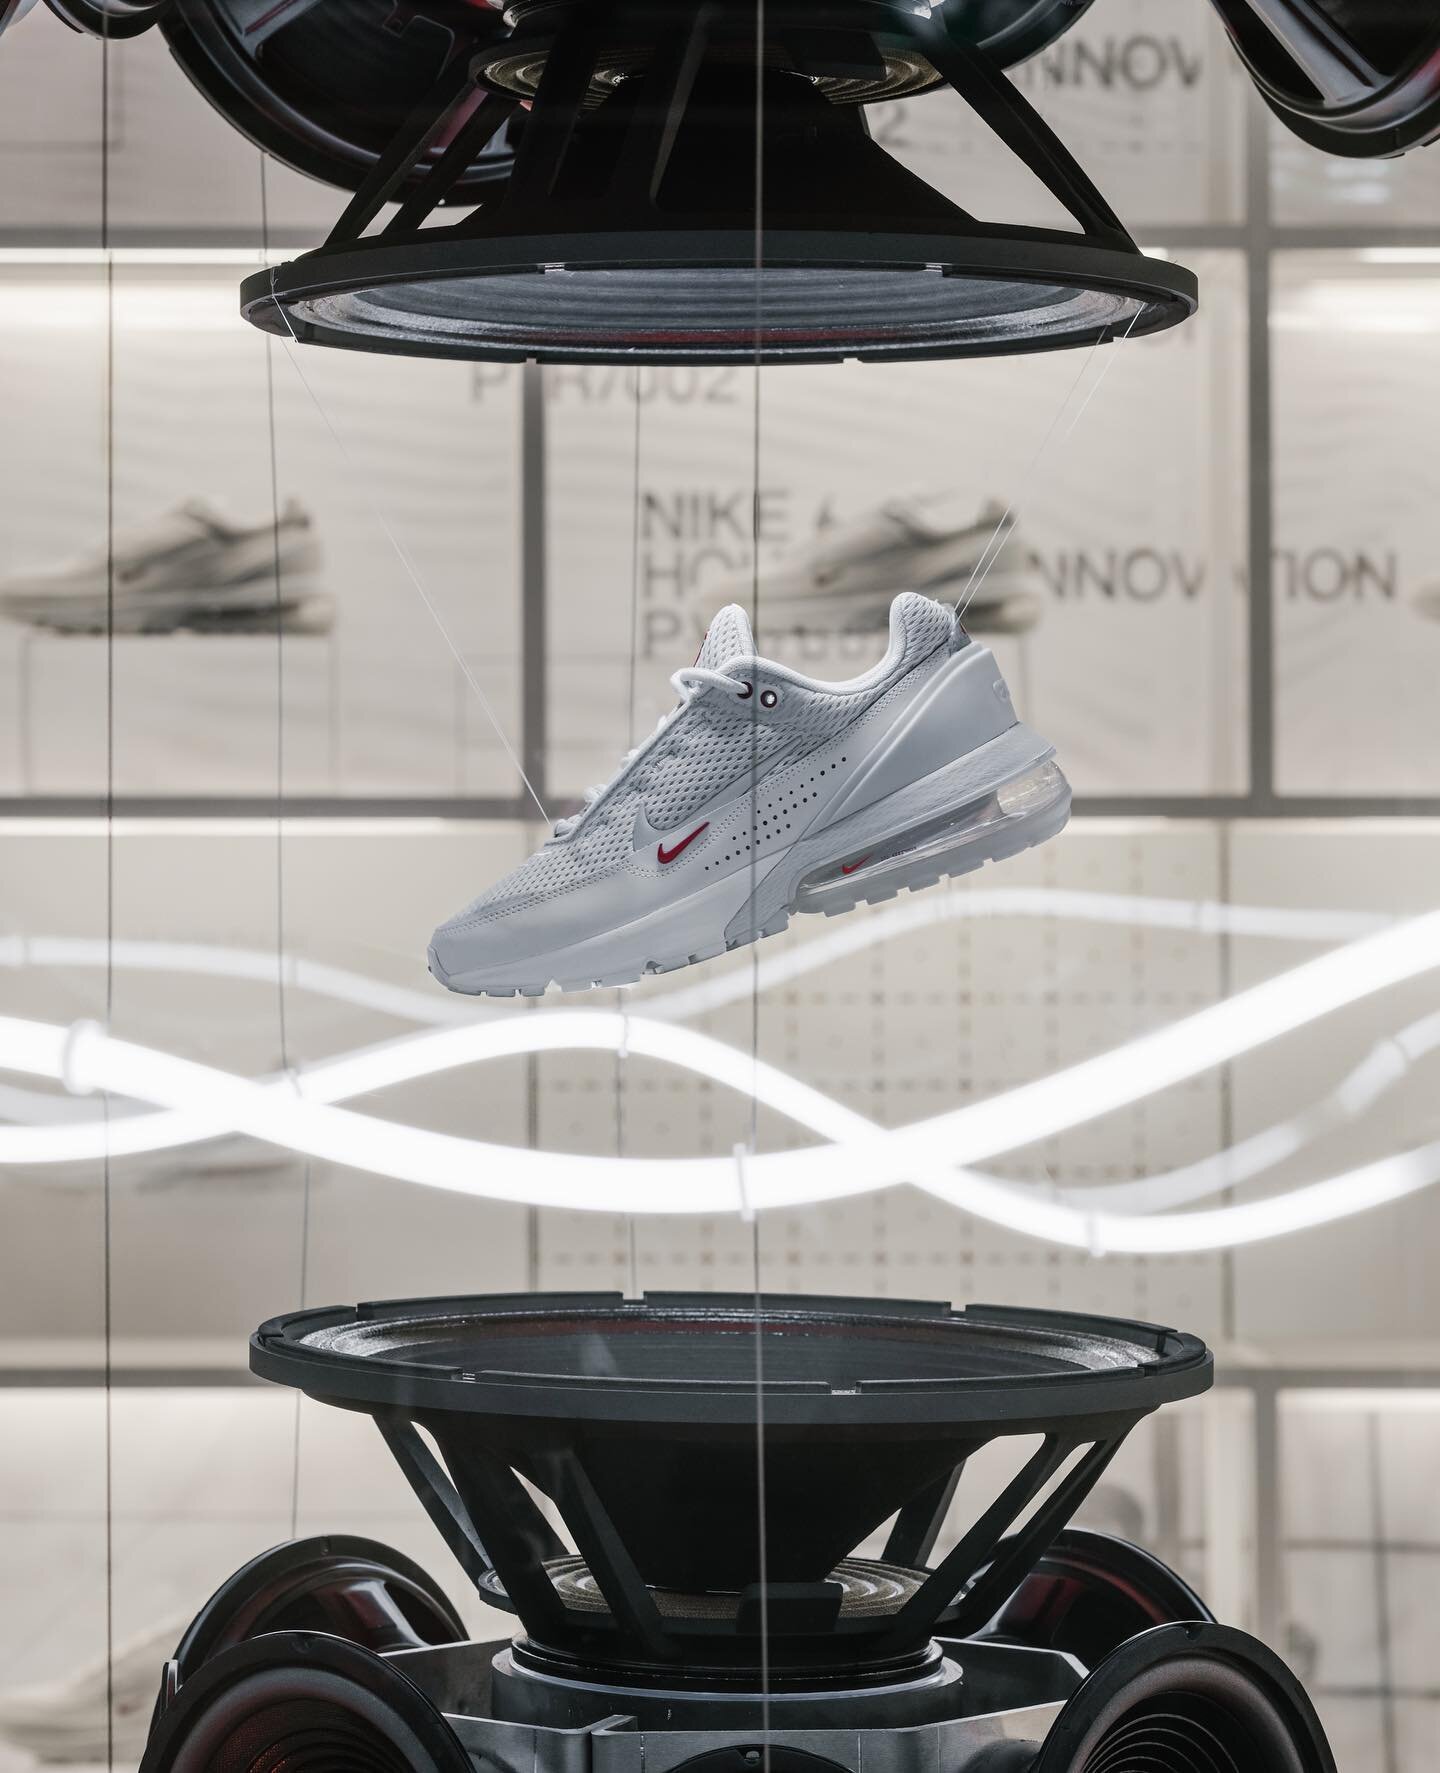 Our first kinetic installation with Nike for the launch of the Air Max Pulse in Paris House of Innovation. 
Thanks to everybody involved! 

📸: @benoitflorencon 

#kinetic #kineticinstallation #lightinstallation #nikeinstallation #nike #nikehouseofin